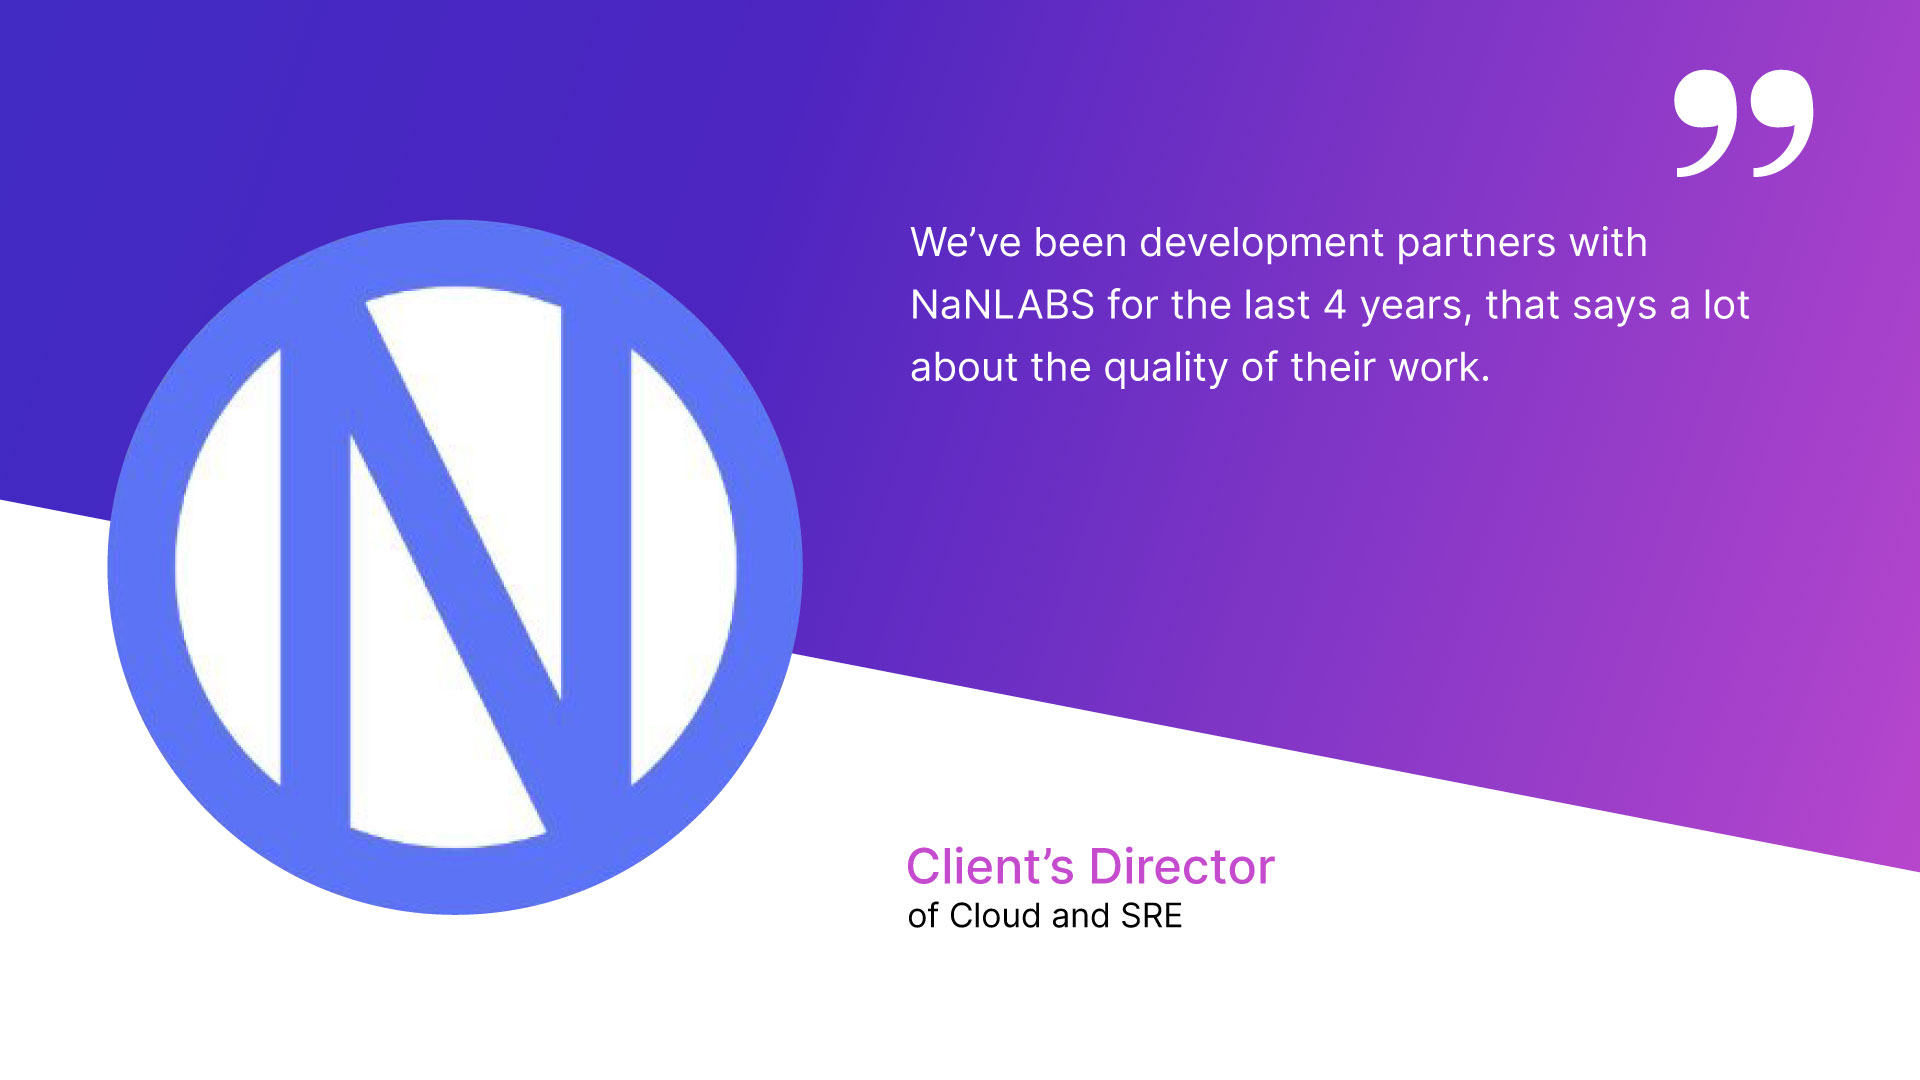 Quote by NaNLABS client’s director of cloud and SRE